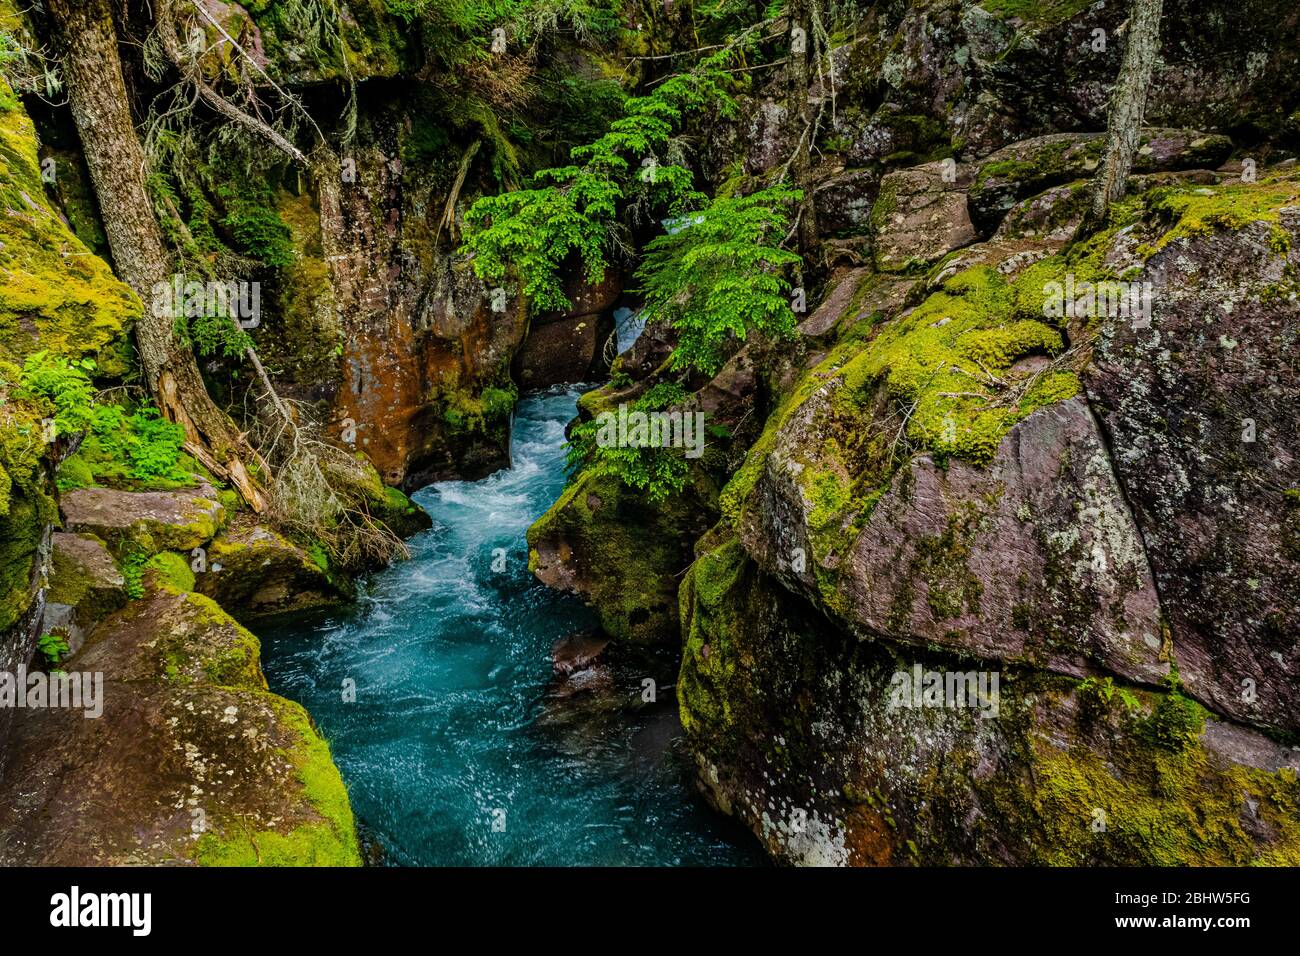 4811  Vivid blue waters and colorful foliage of Avalanche Creek at Glacier National Park Stock Photo